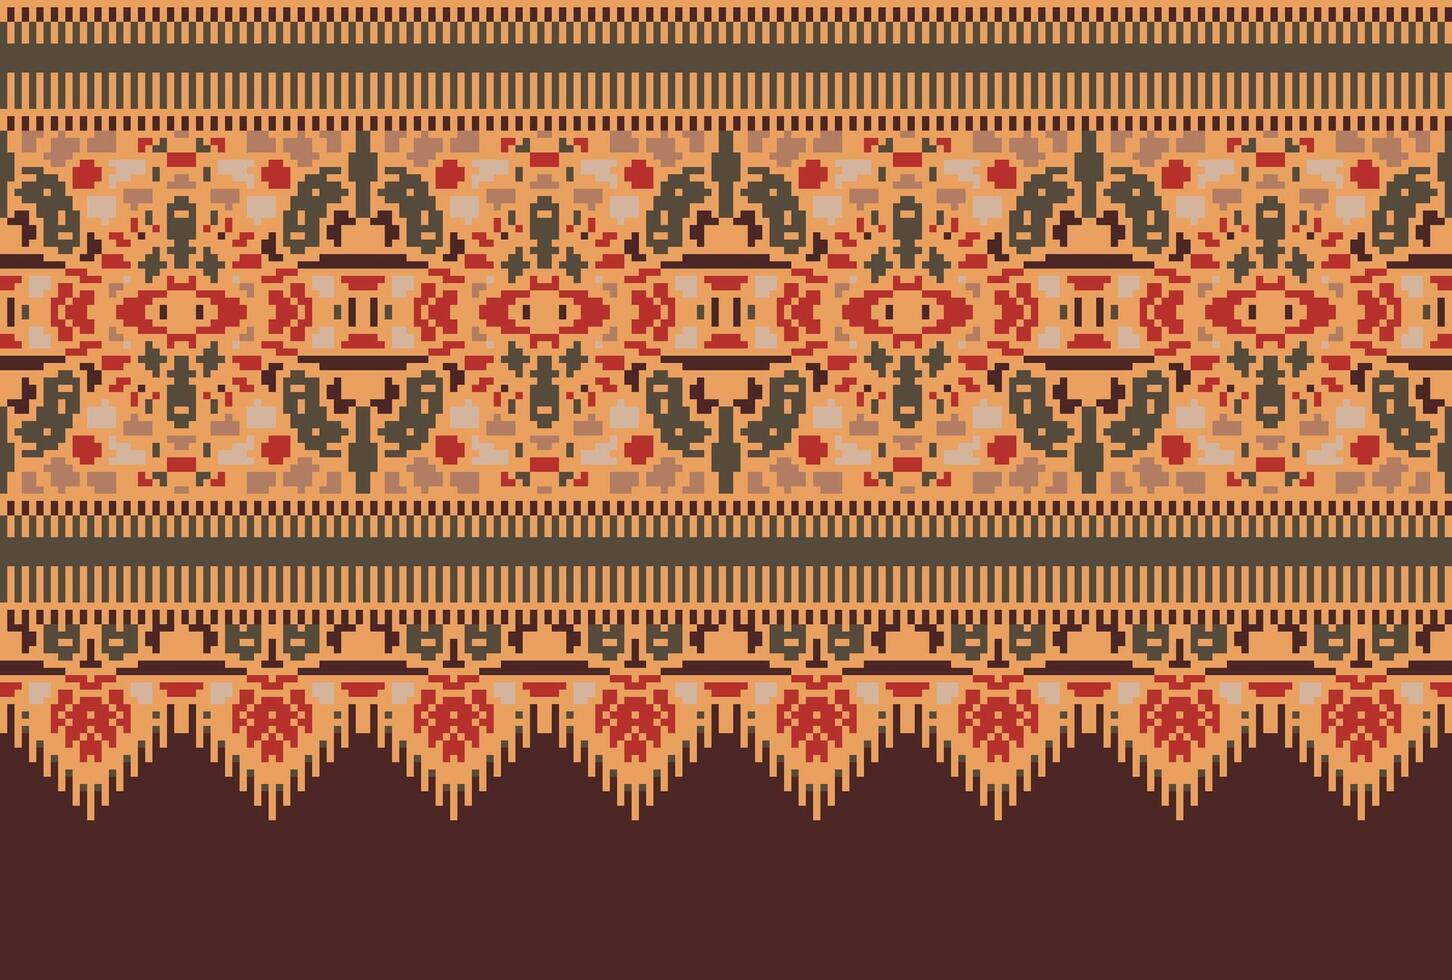 Pixel Cross Stitch pattern with Floral Designs. Traditional cross stitch needlework. Geometric Ethnic pattern, Embroidery, Textile ornamentation, fabric, Hand stitched pattern, Cultural stitching vector